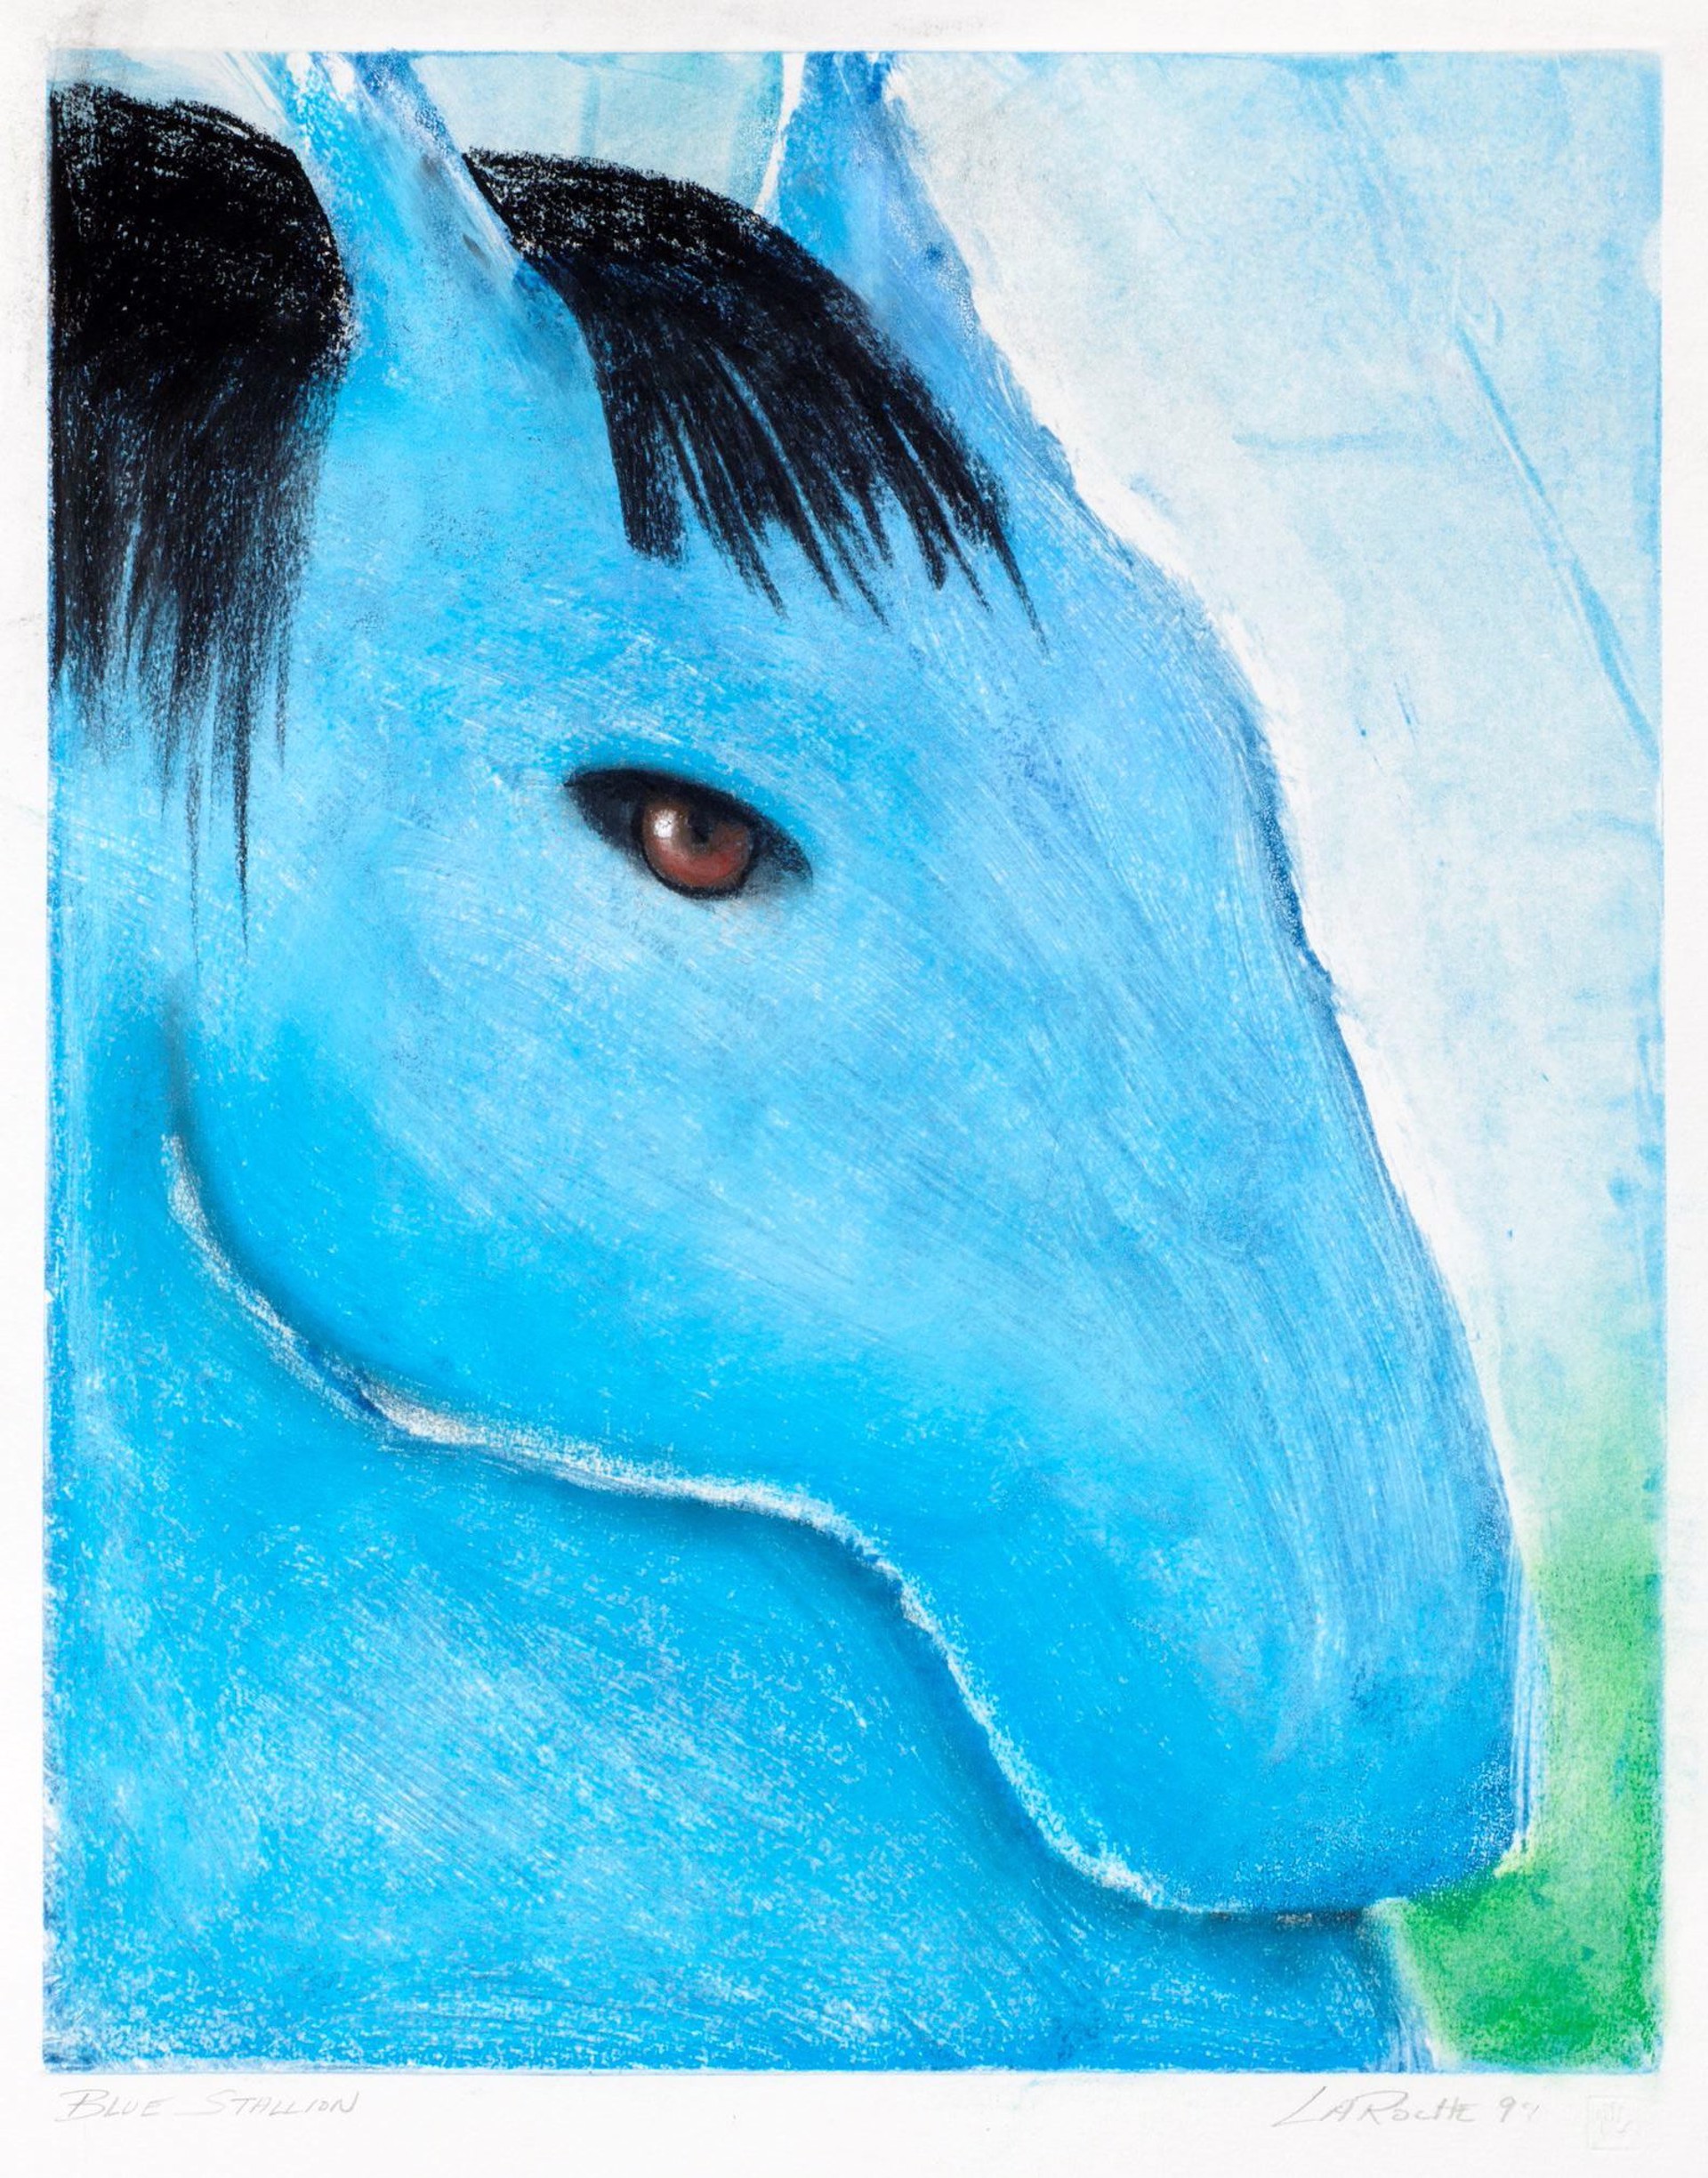 Blue Stallion - From Carole's Private Collection by Carole LaRoche